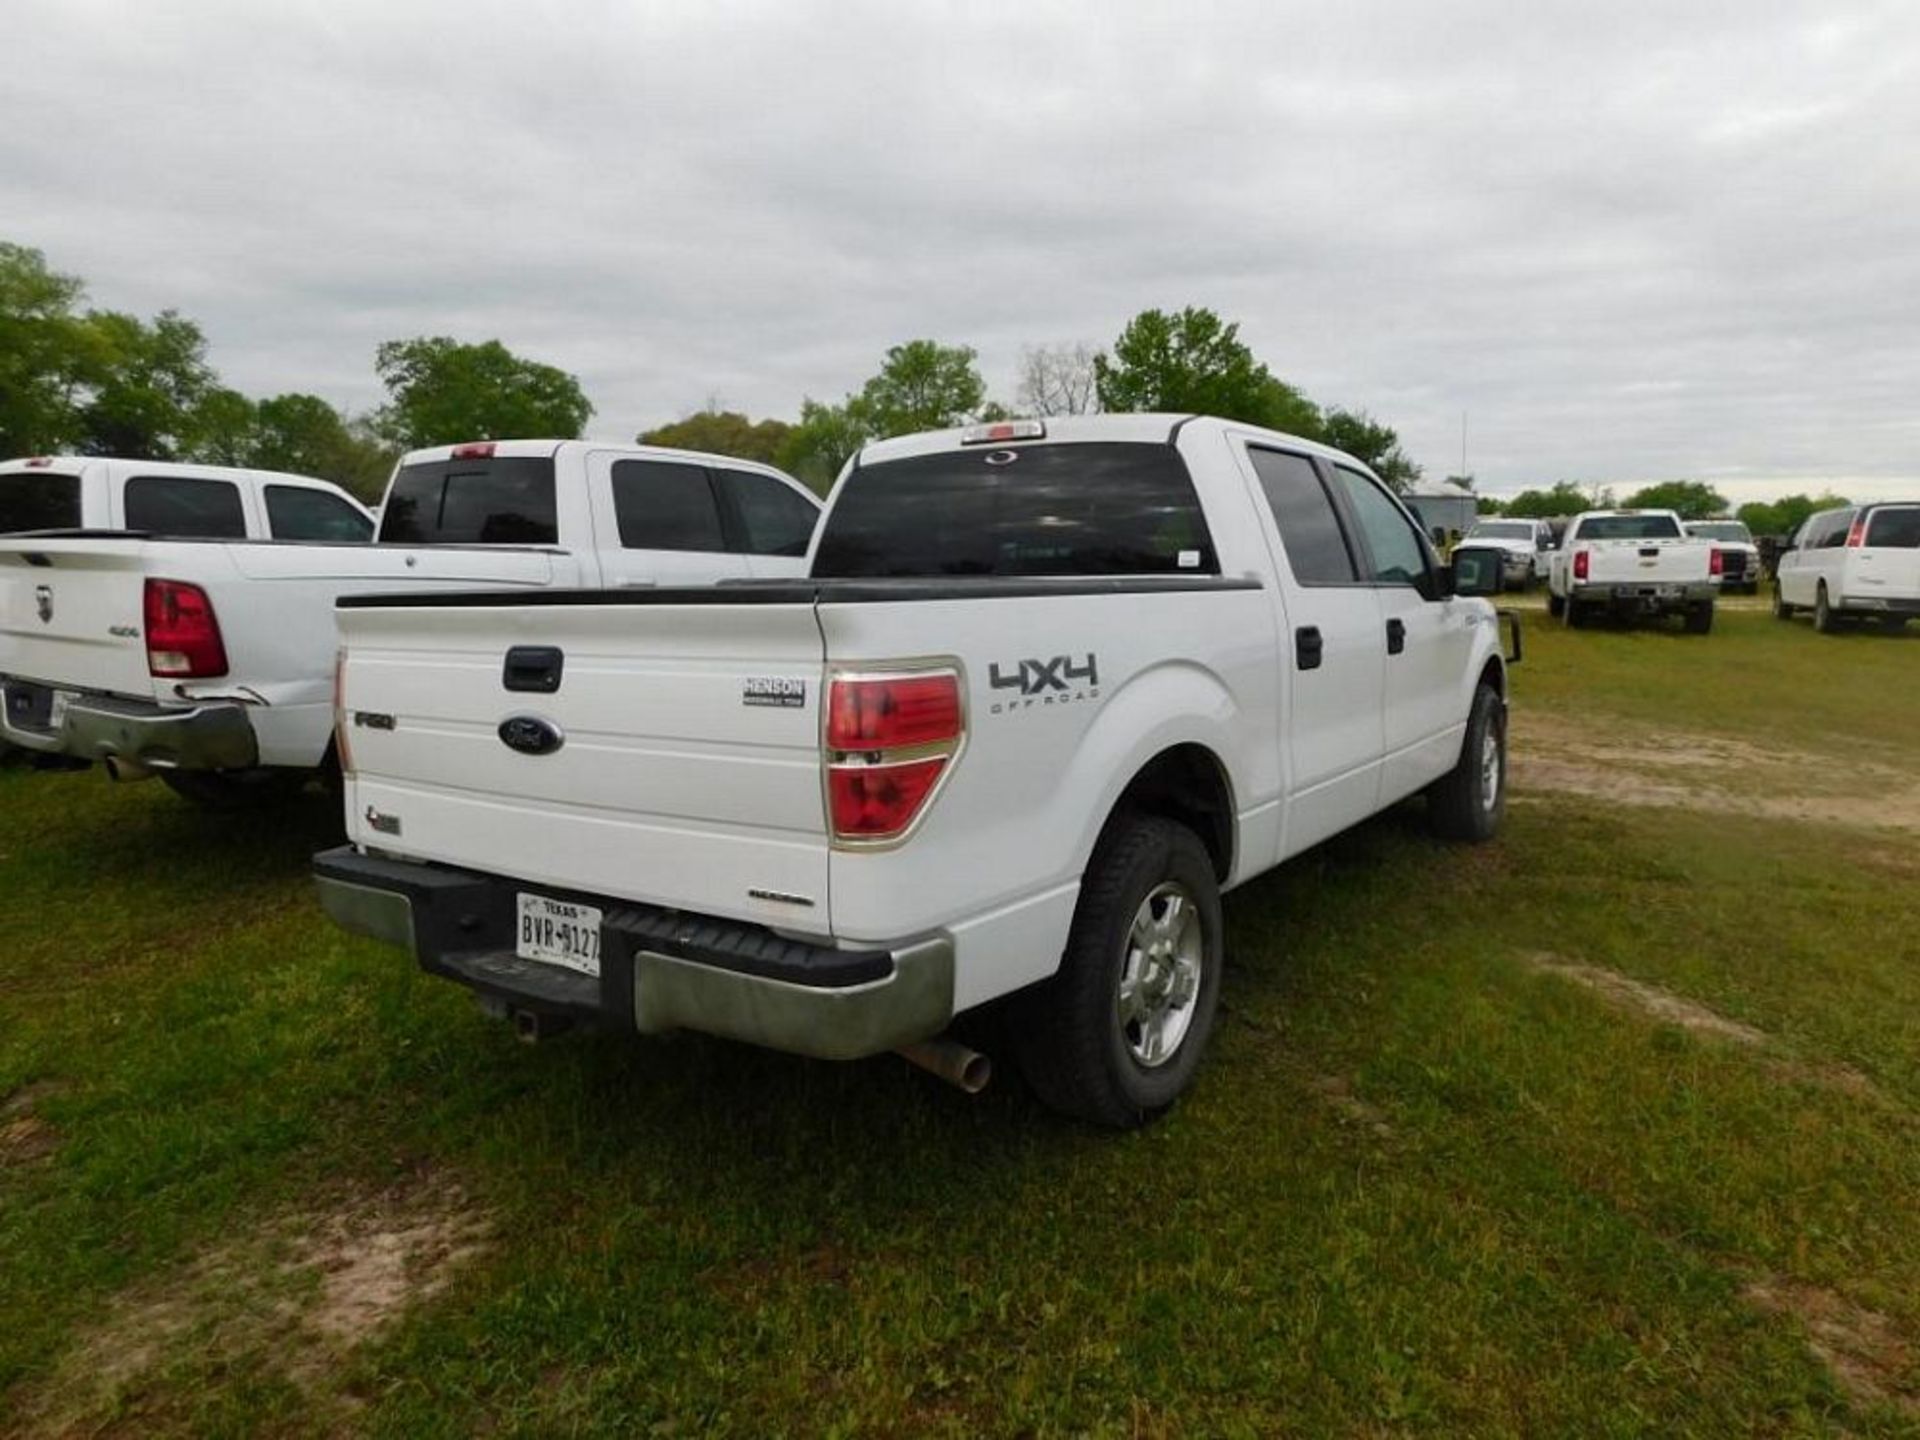 2013 Ford F-150 XLT 4x4 Crew Cab Pick-up Truck, VIN 1FTFW1EF4DFB20236, 5-1/2 ft. Bed, 5.0 Liter Gaso - Image 4 of 4